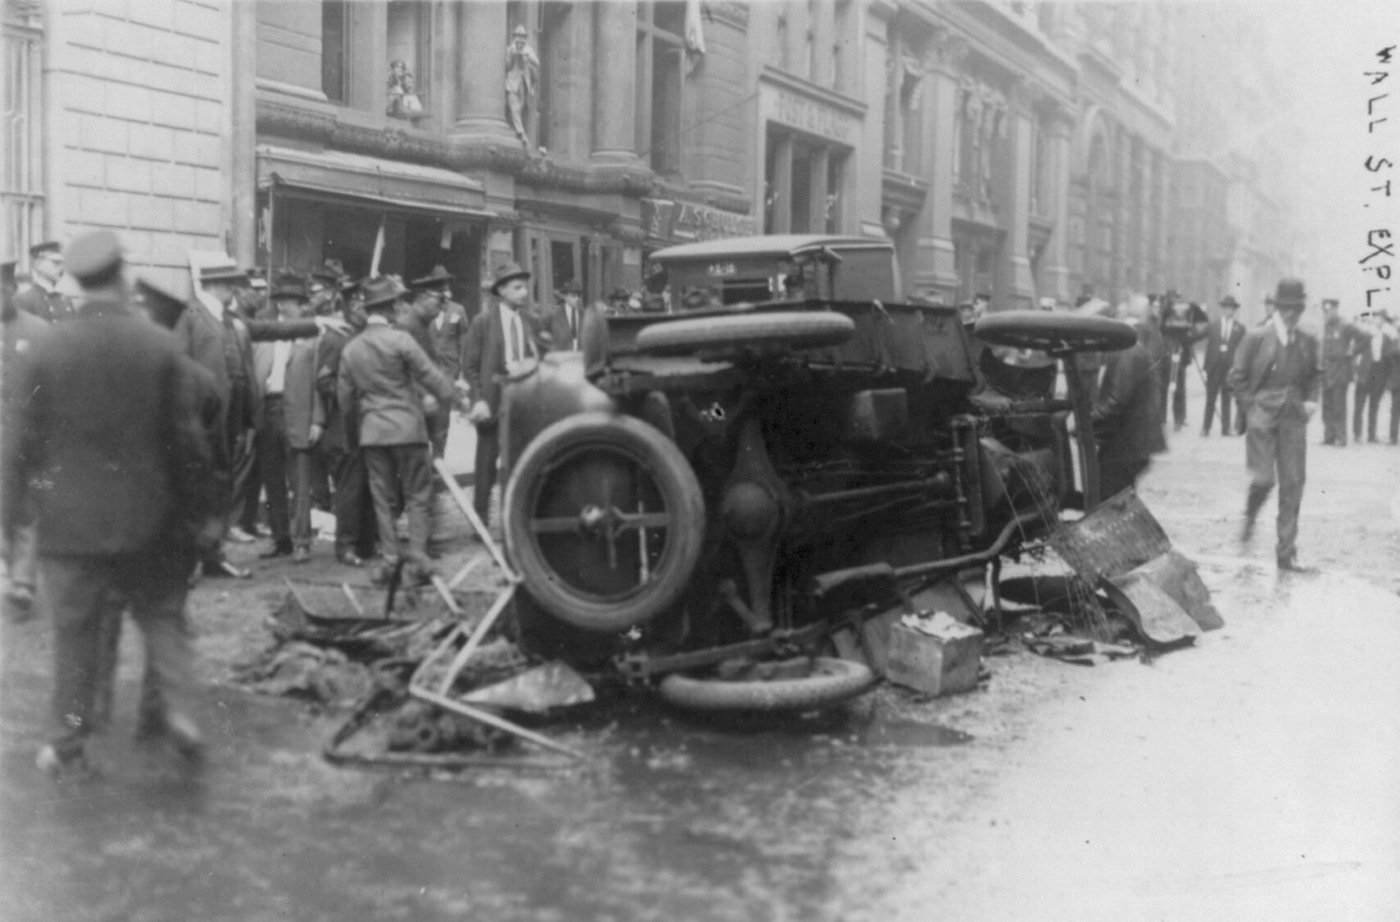 Aftermath of bombing at Wall Street financial district in New York on September 16, 1920, killing over 30 people and injuring some 300. Library of Congress photo.